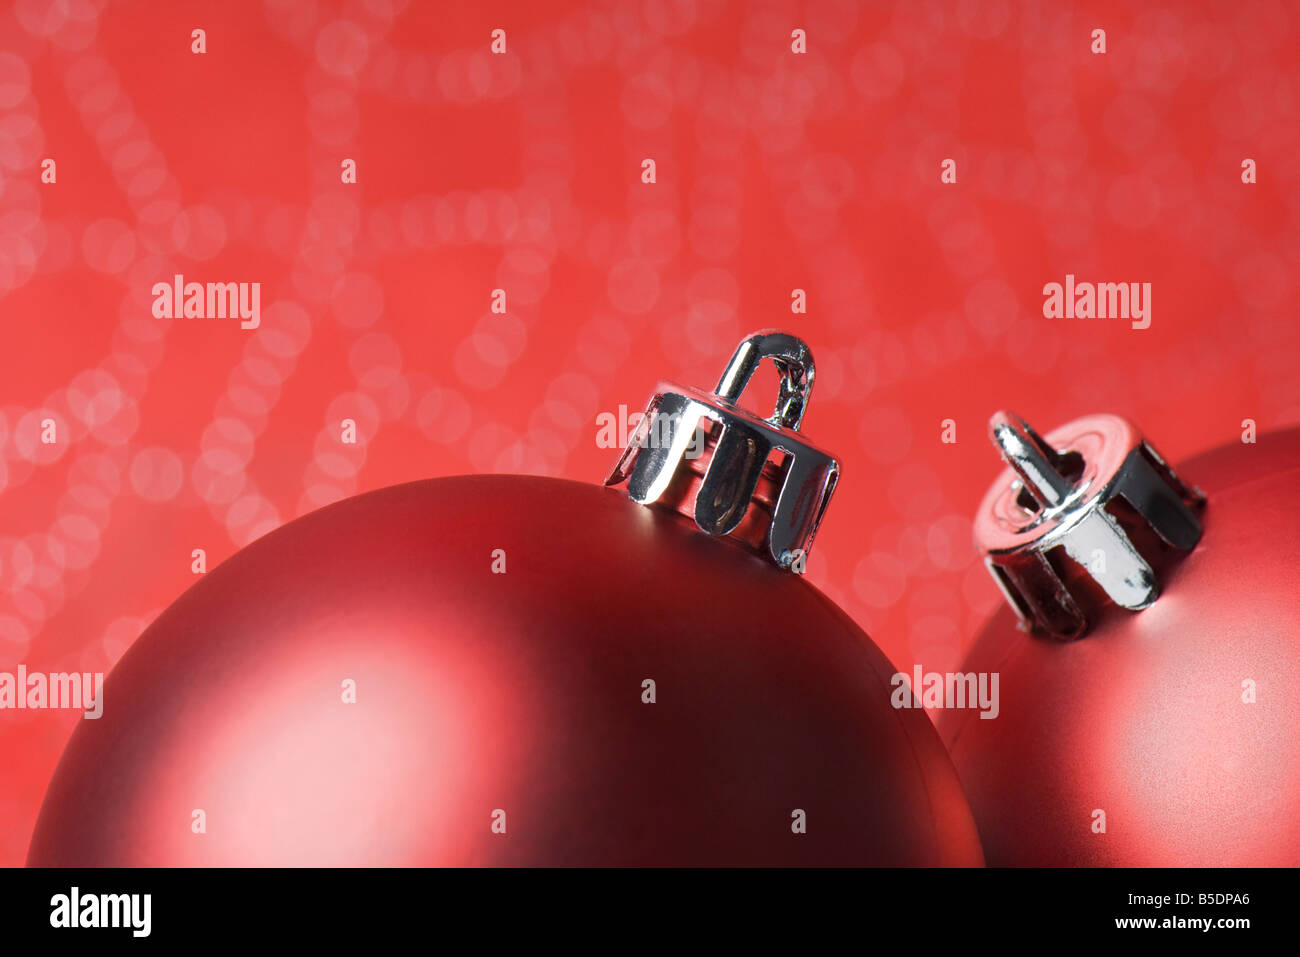 Two red Christmas tree ornaments, close-up Stock Photo